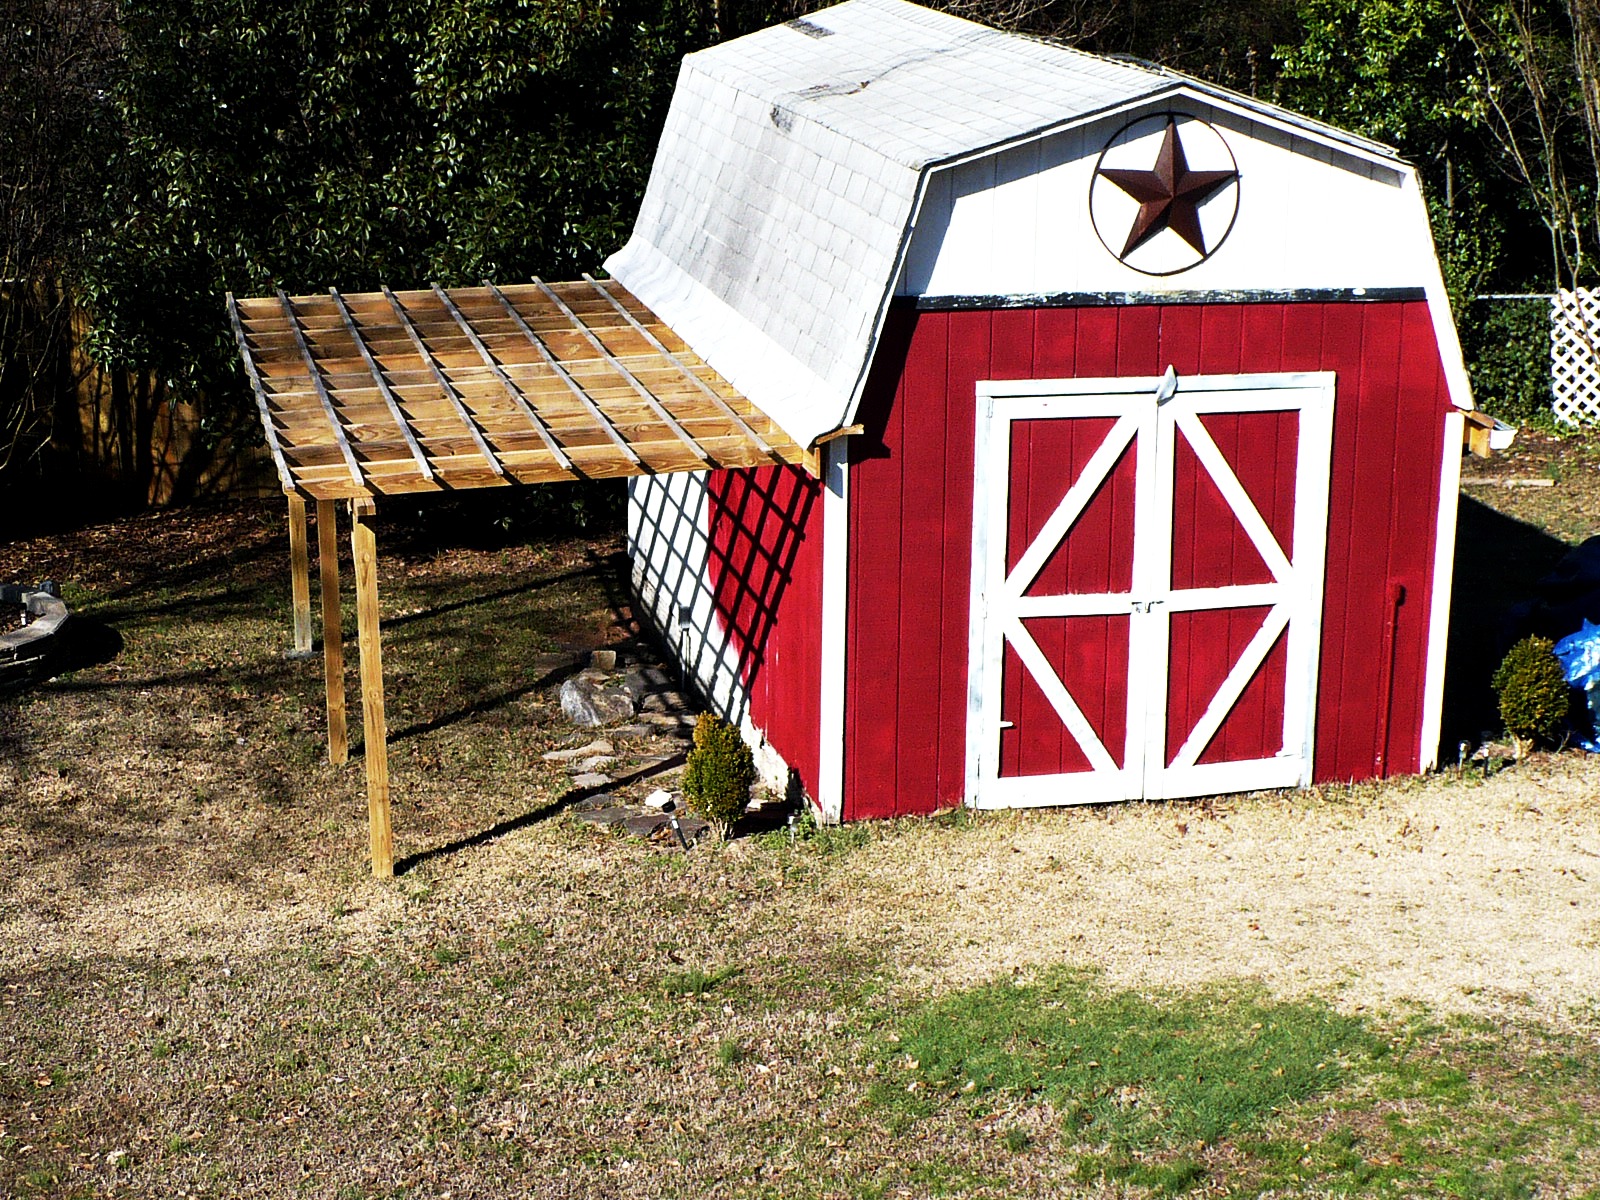 Eclectic Red Barn: April 2021